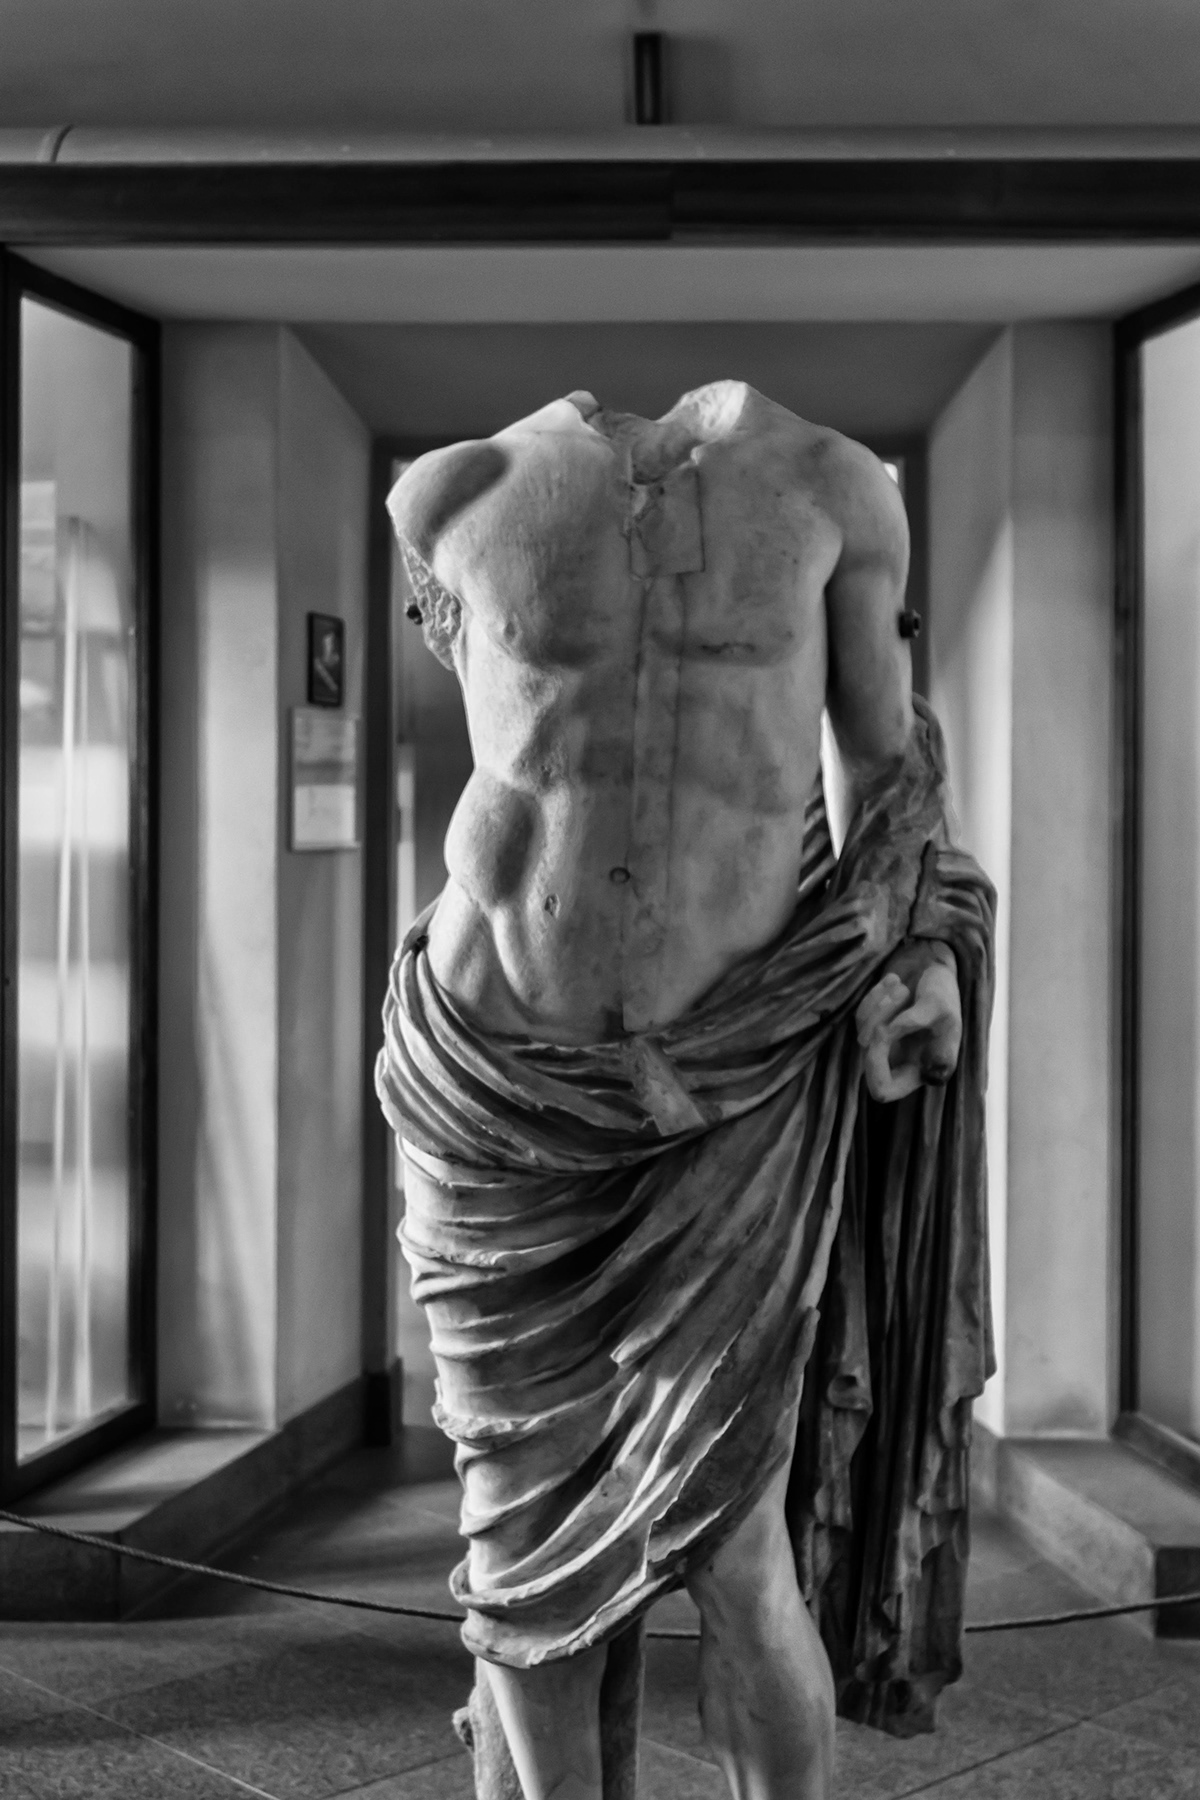 italian  Renaissance  statue  Drmatic  gritty  Grunge  dark  emotional  pain  fear  black and White